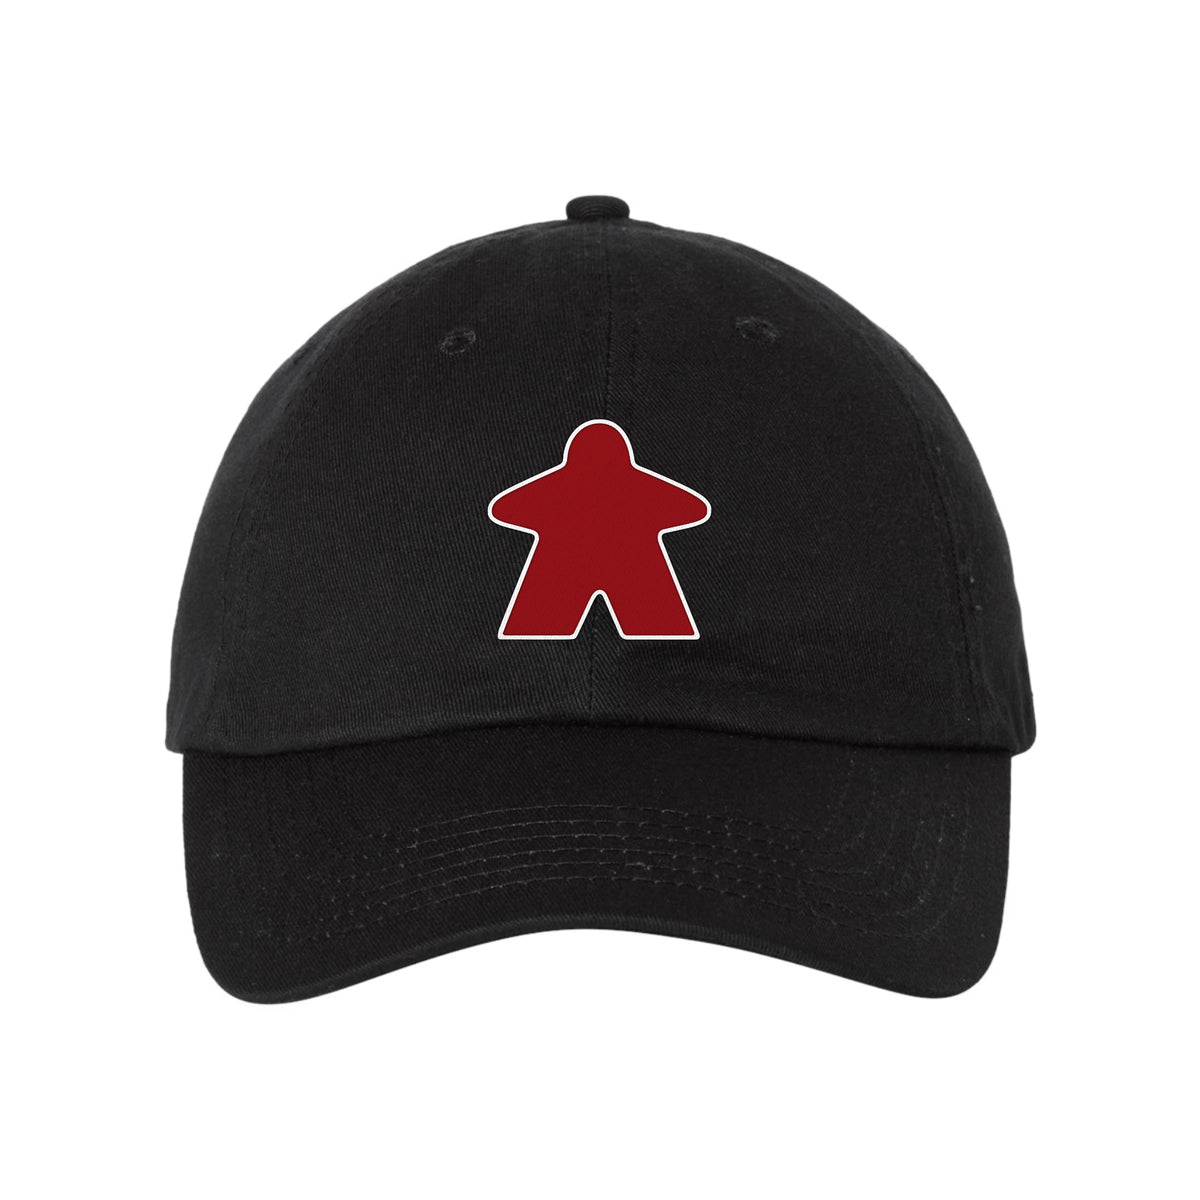 Red Meeple Board Game Curved Bill Hat